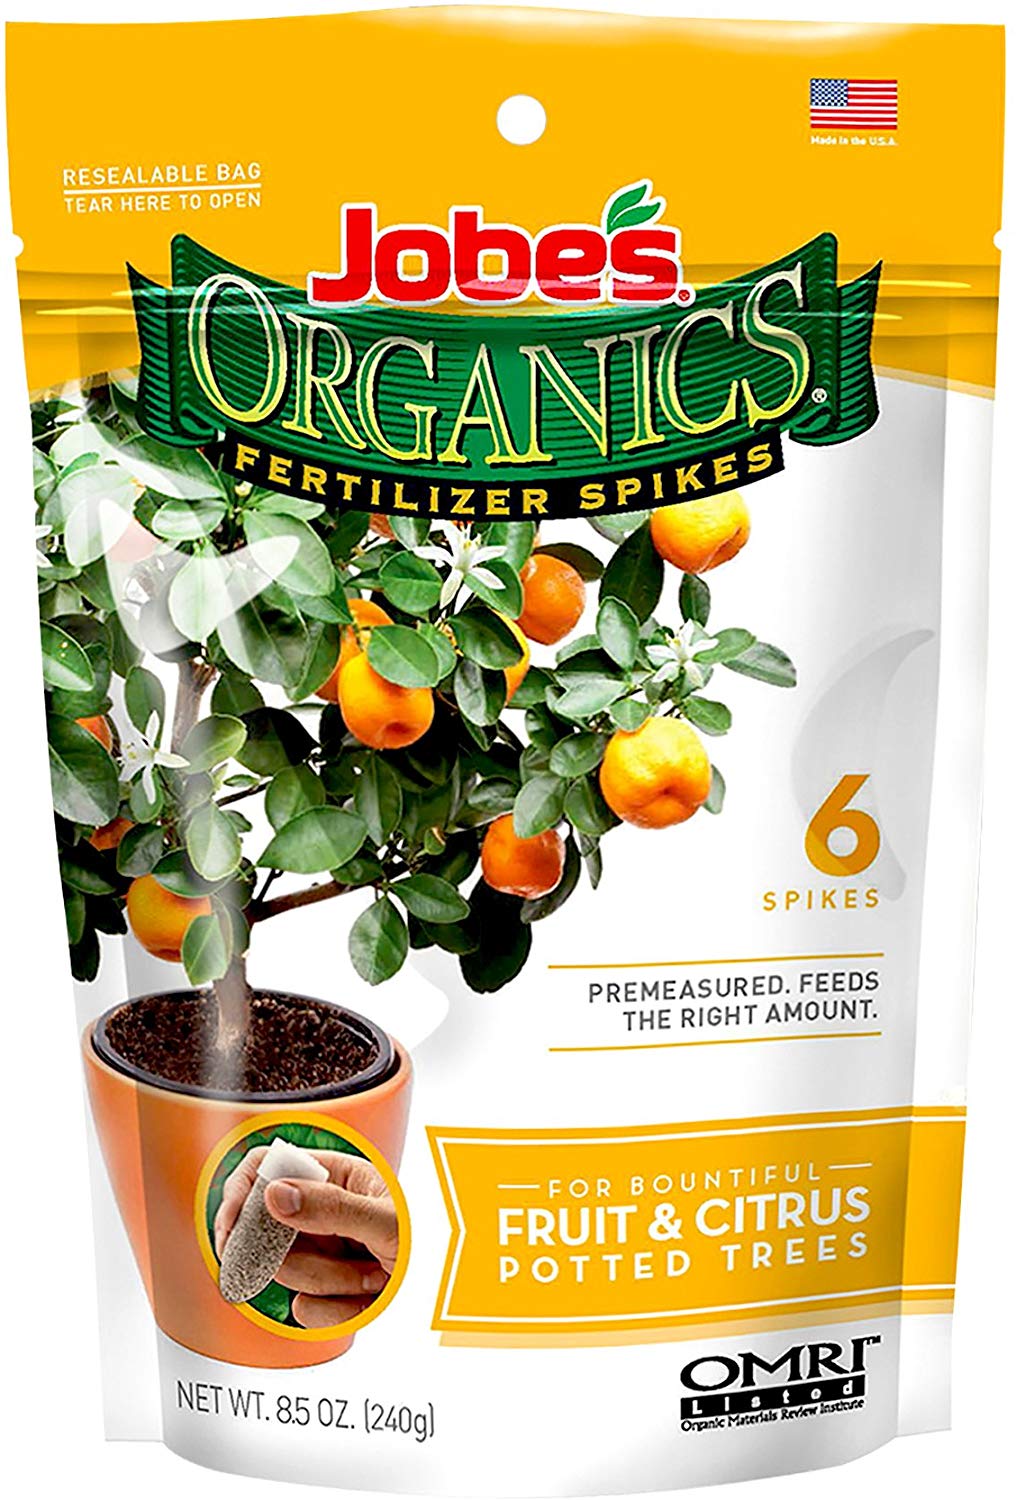 Jobe’s Organics Fruit & Citrus Tree Fertilizer Spikes, 3-5-5 Time Release Fertilizer for all Container or Indoor Fruit Trees, 6 Spikes per Package